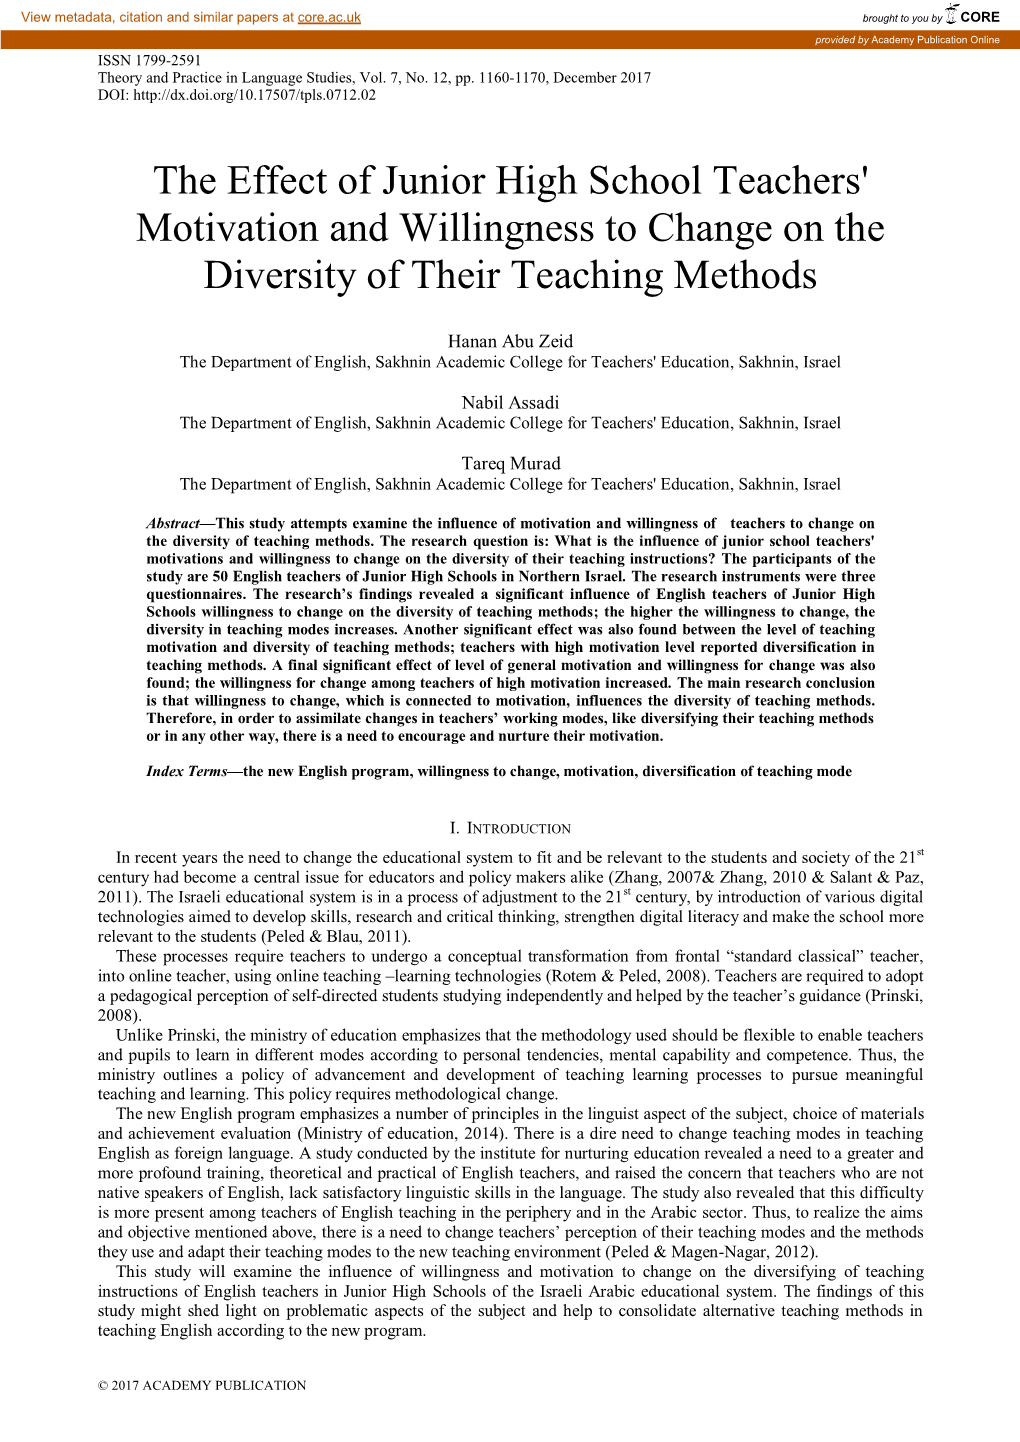 The Effect of Junior High School Teachers' Motivation and Willingness to Change on the Diversity of Their Teaching Methods